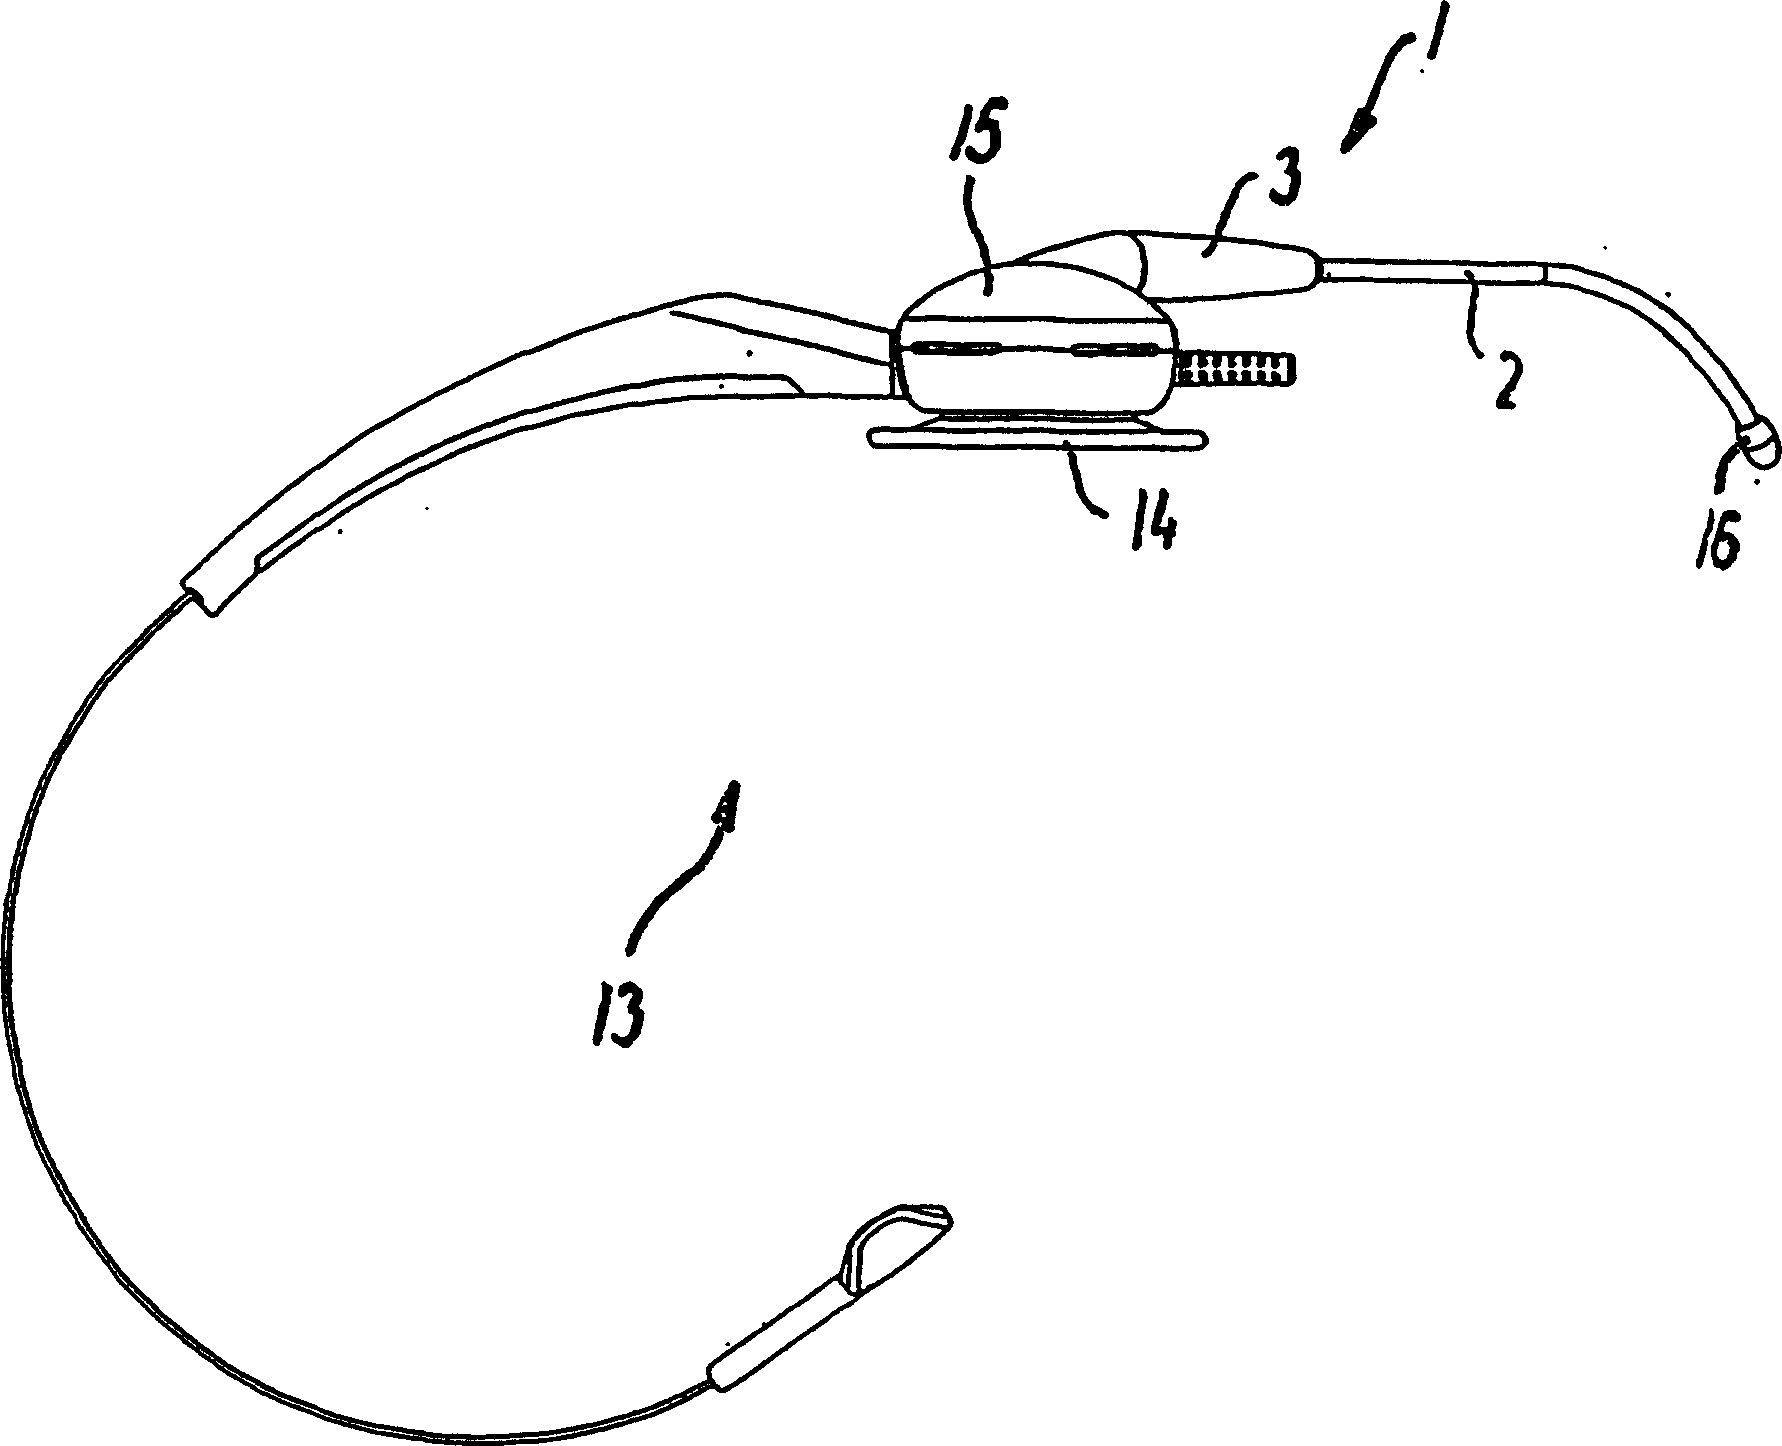 Acoustic transmission connection, headset with acoustic transmission connection, and uses of acoustic transmission connection